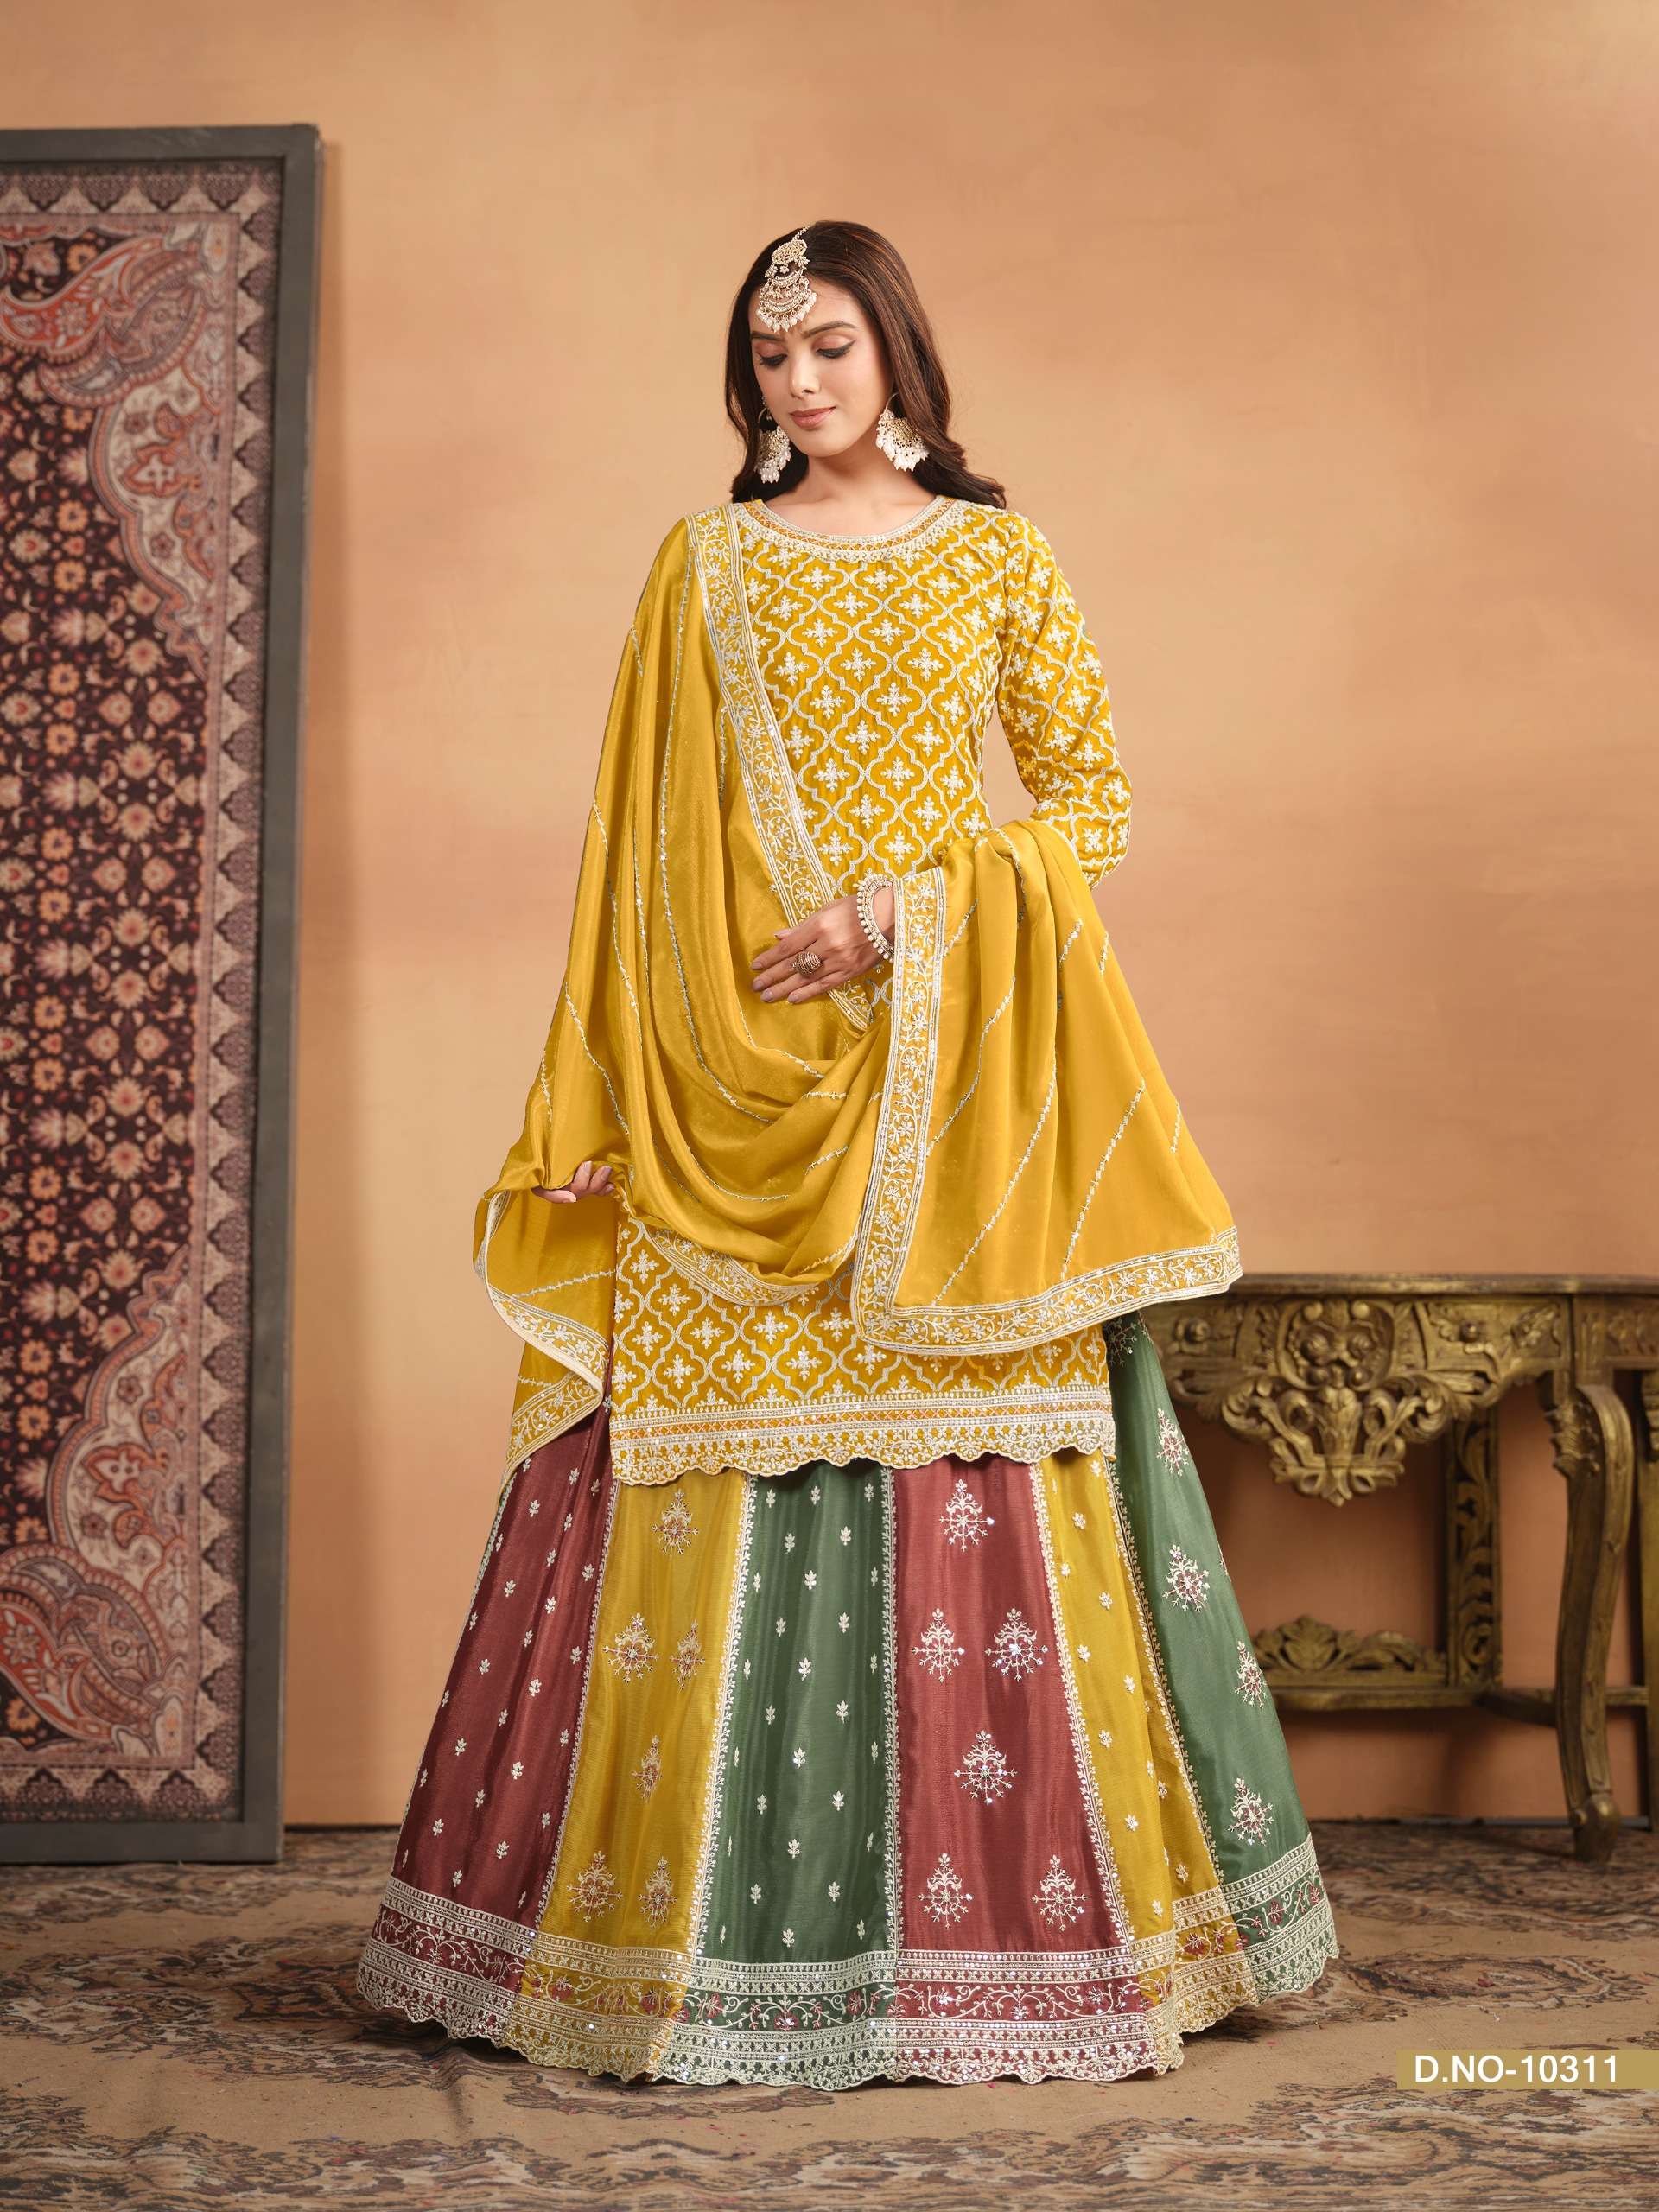 anjubaa vol 31 series 10311 to 10313 peplum design partywear suit top n lehenga chinnon designer partywear multicolour skirt with top heavy embroidery suit 